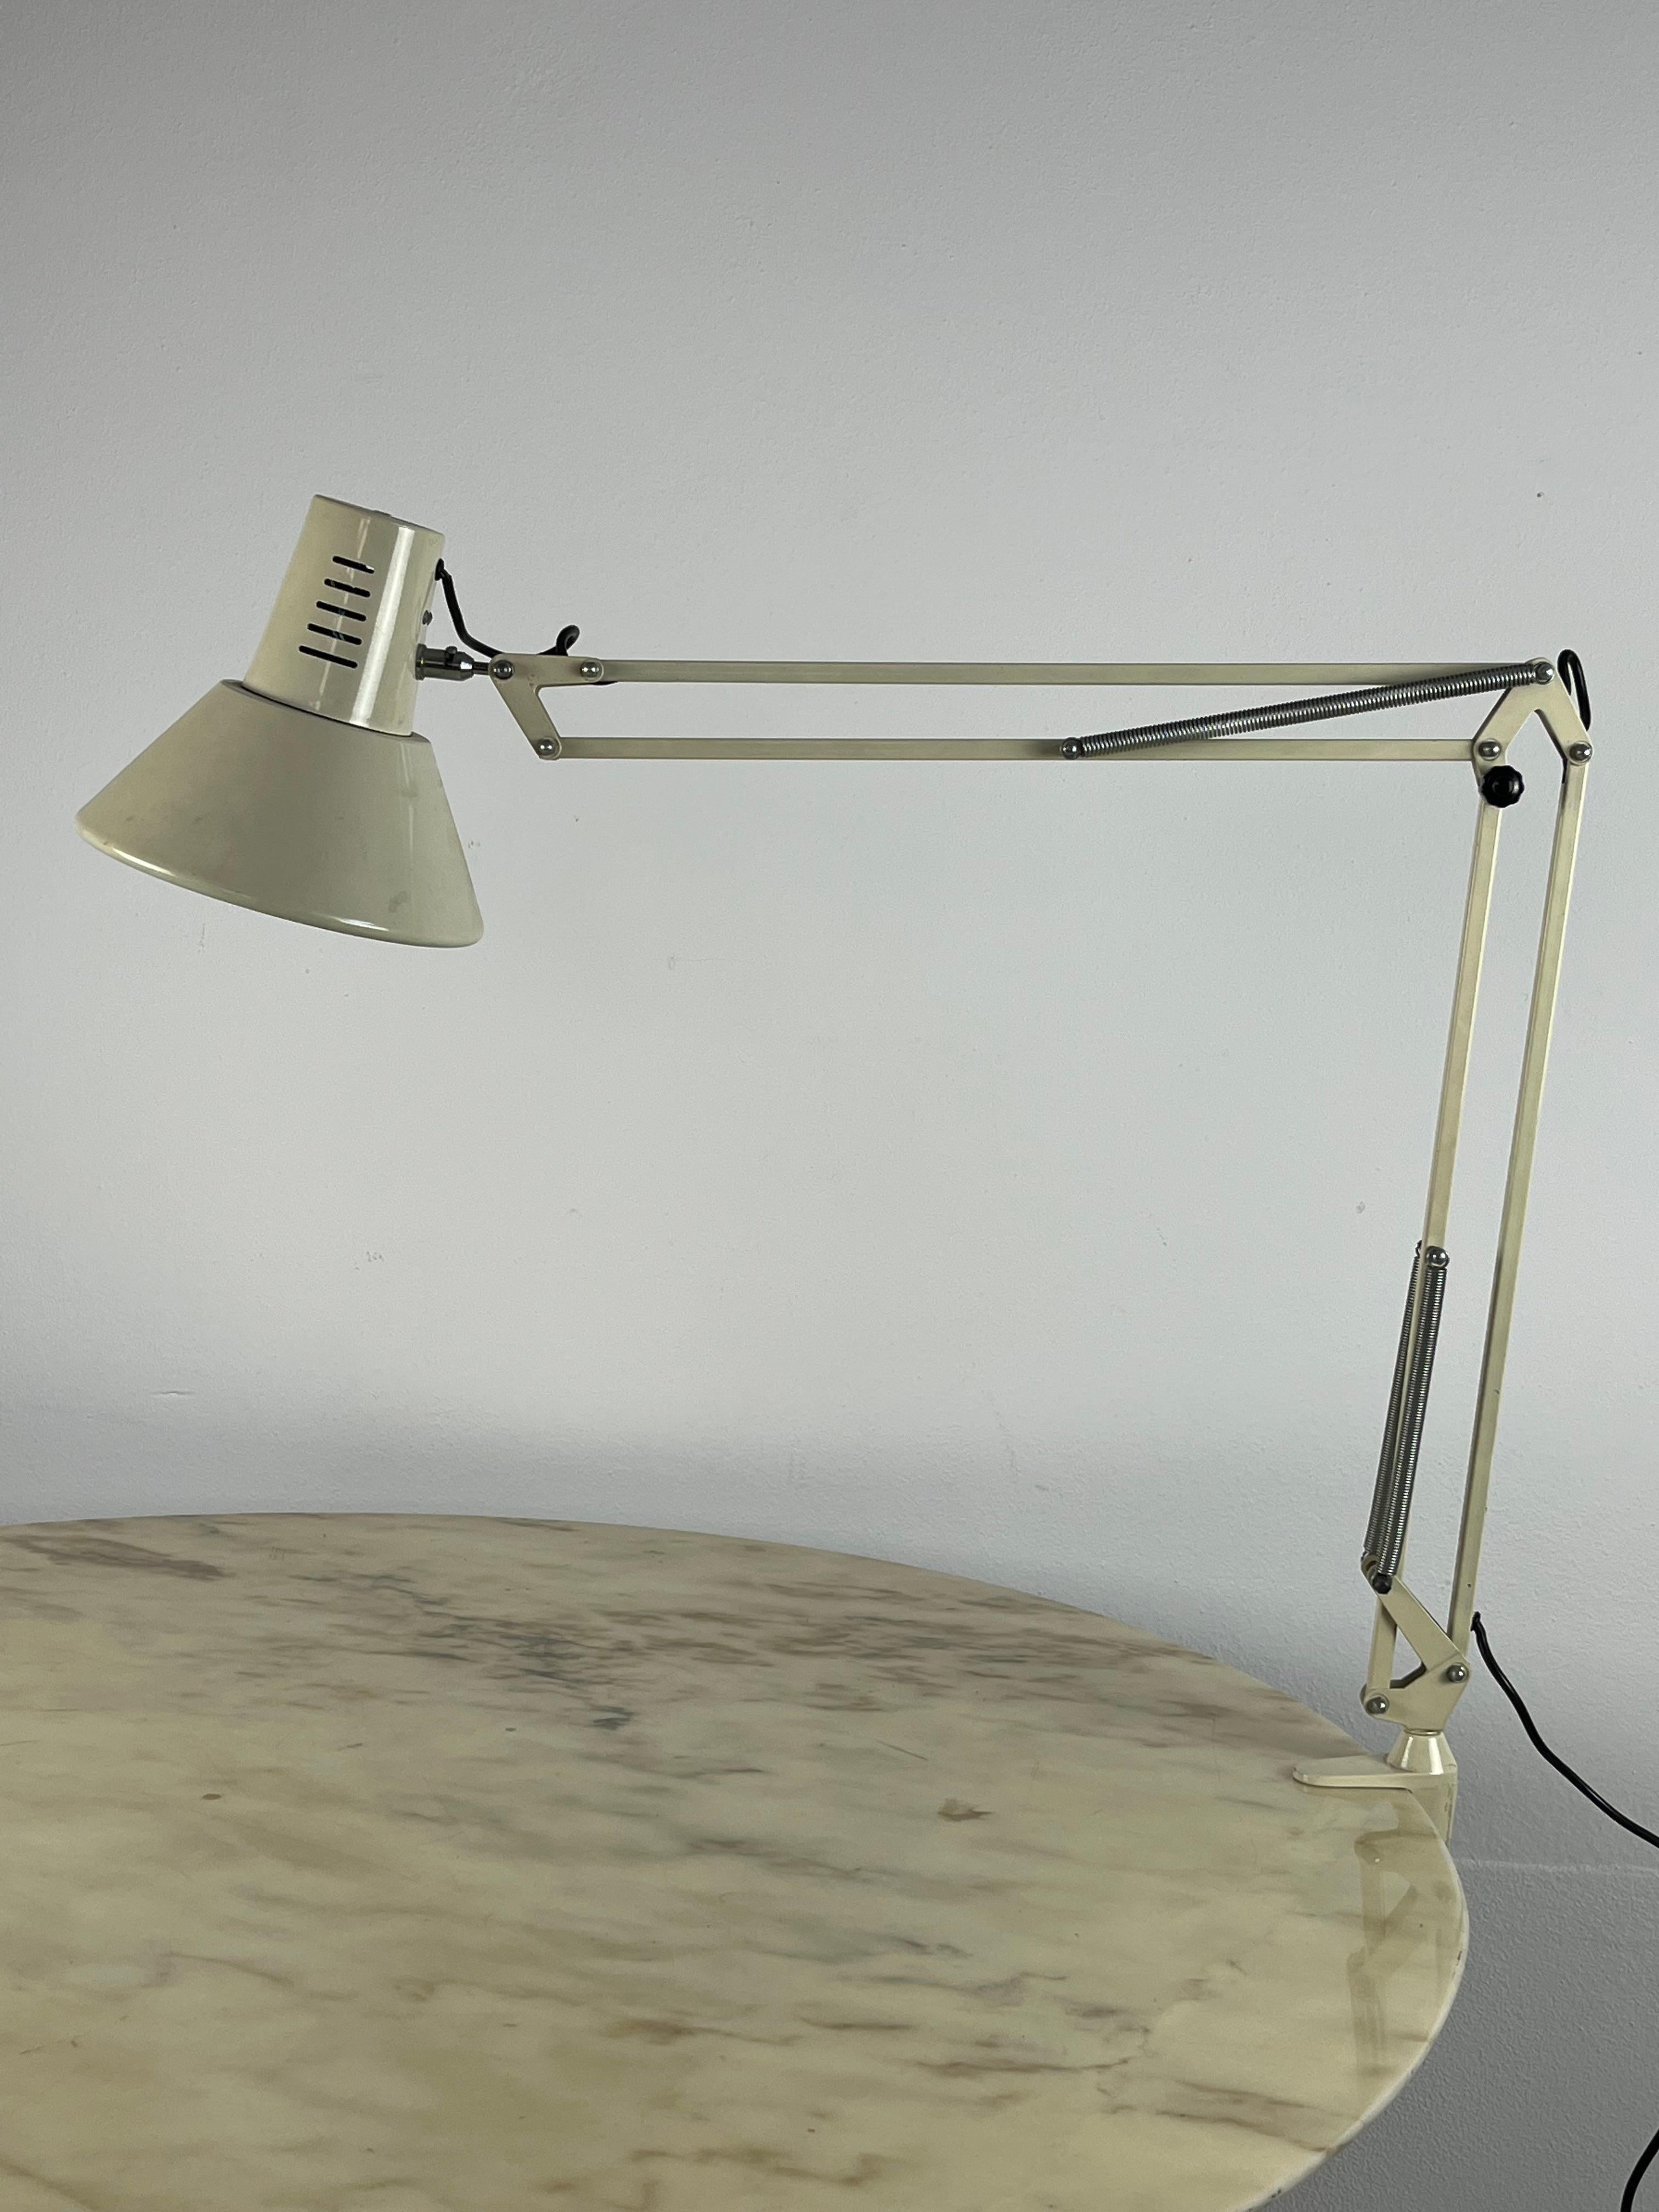 Extendable table lamp with clamp, made in Italy, 1970s.
Small signs of wear but still in excellent condition.The arm can be directed in any direction on the table. It reaches 100 cm from the clamp. The ceiling light has a diameter of 20 cm.